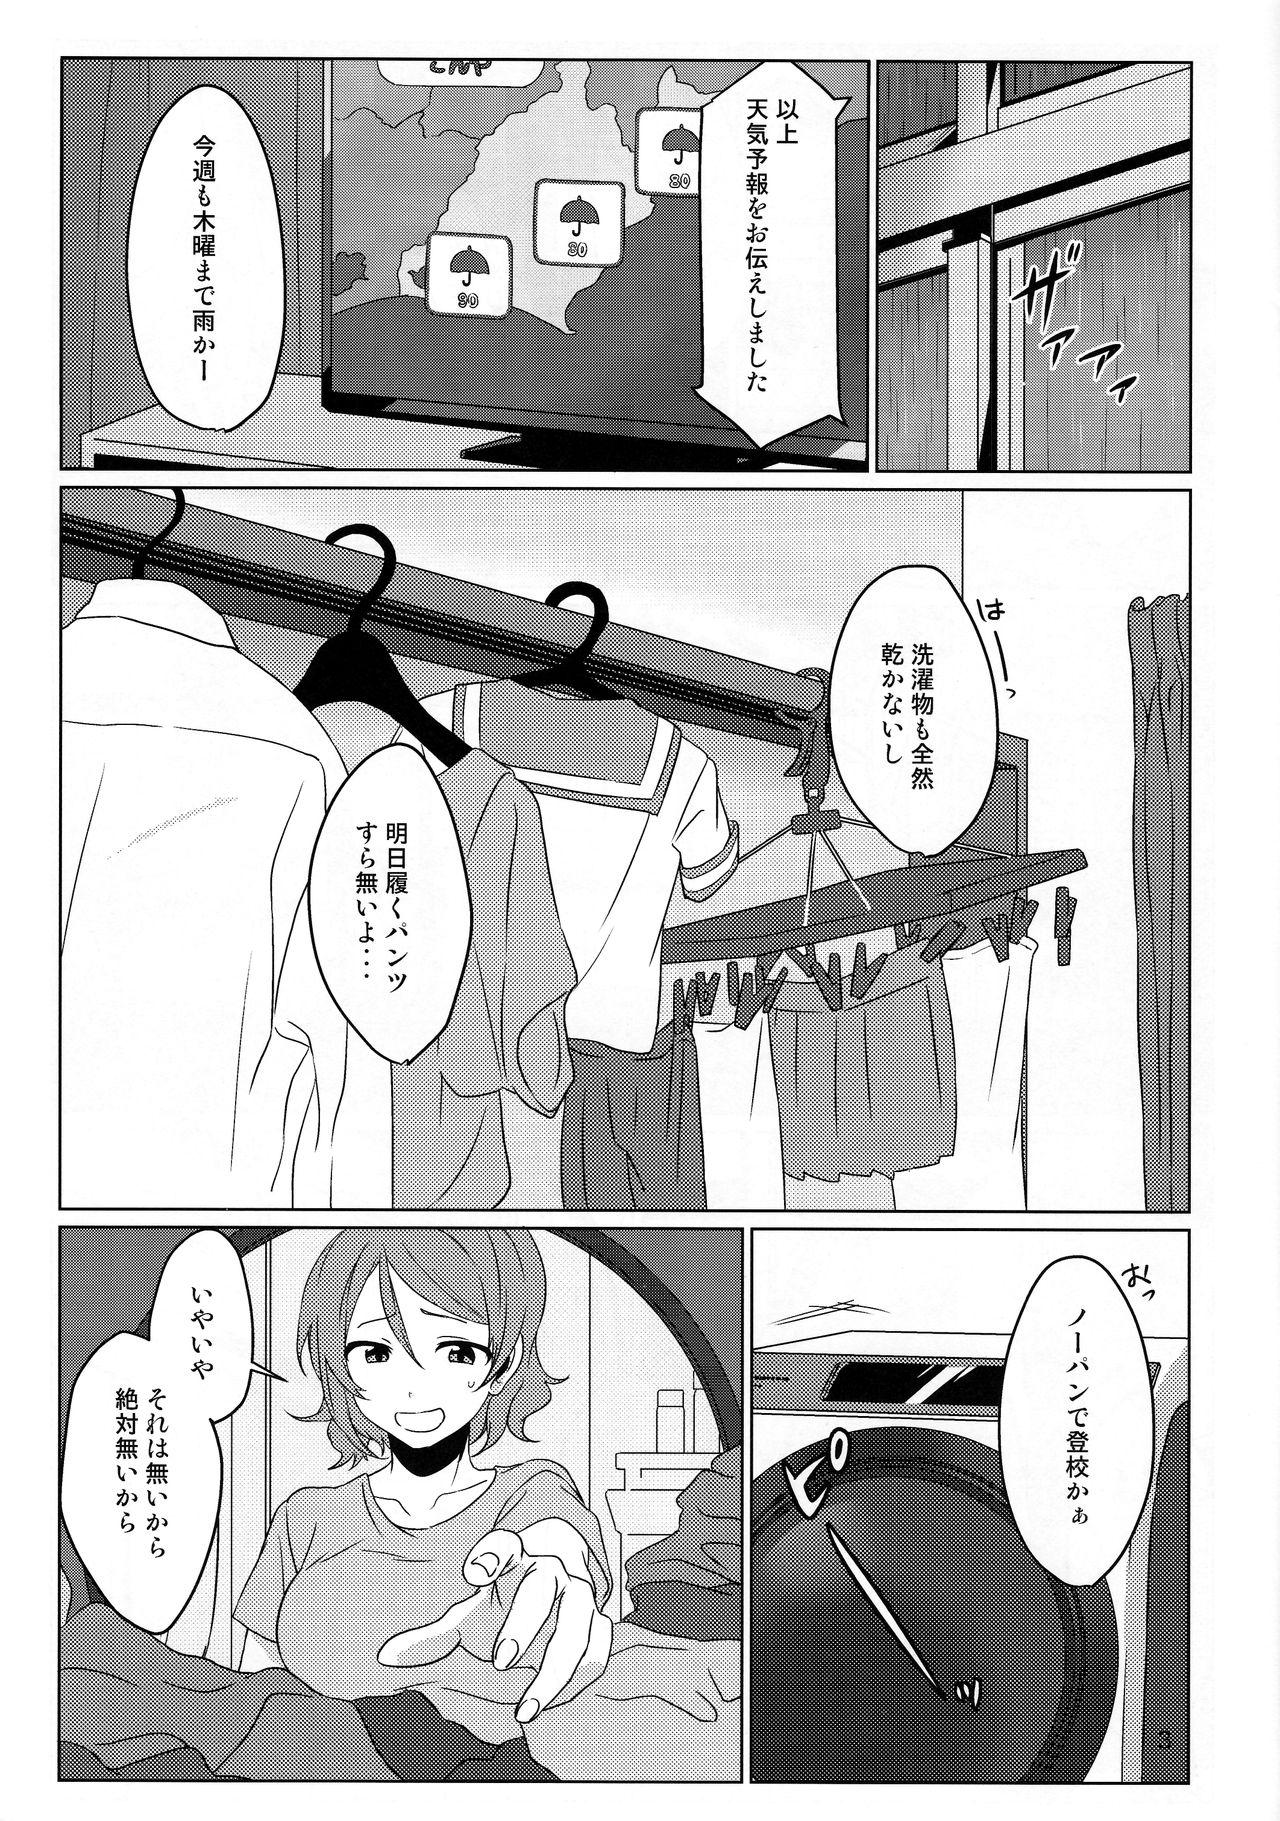 Red Coin laundry - Love live sunshine Gay Kissing - Page 2